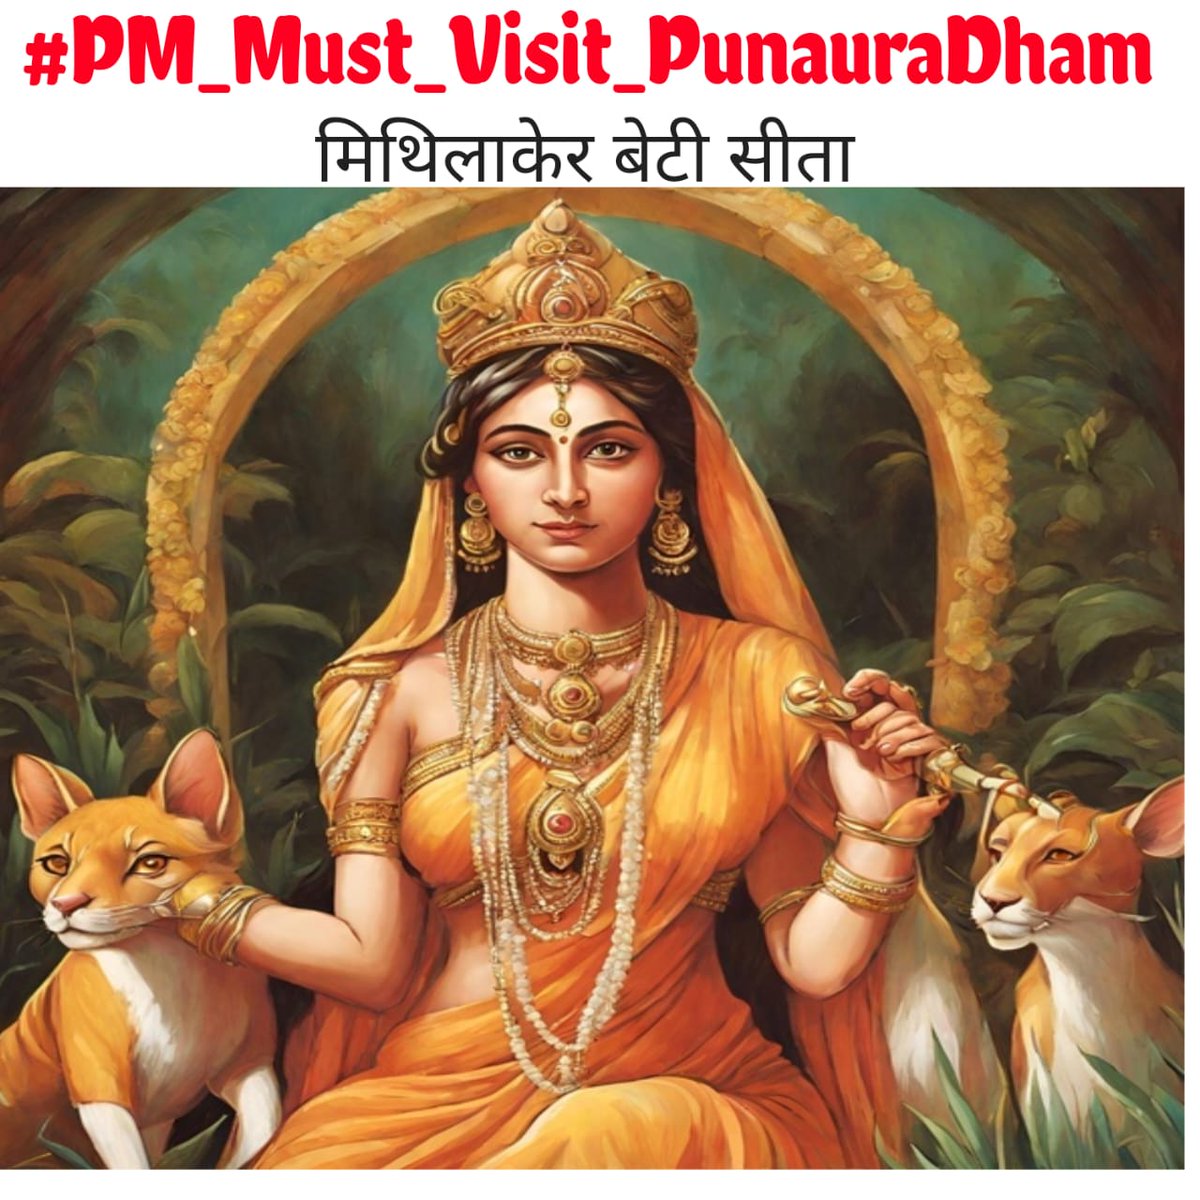 You went to Badrinath, you went to Ayodhya, why did you forget Punauradham, Mr. Prime Minister? #PM_Must_Visit_PunauraDham @narendramodi